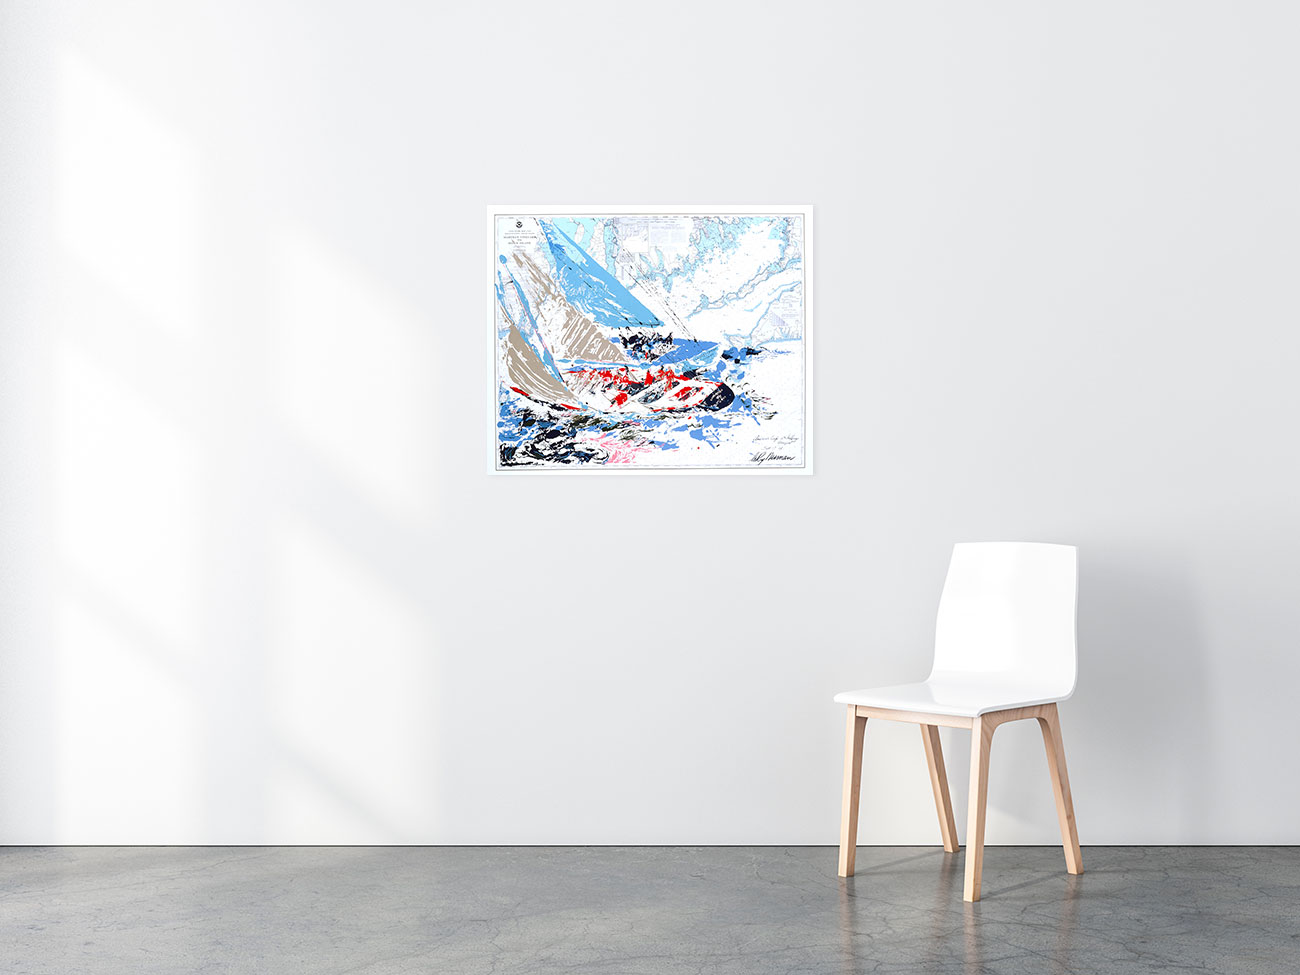 Americas Cup Poster In Art Posters for sale